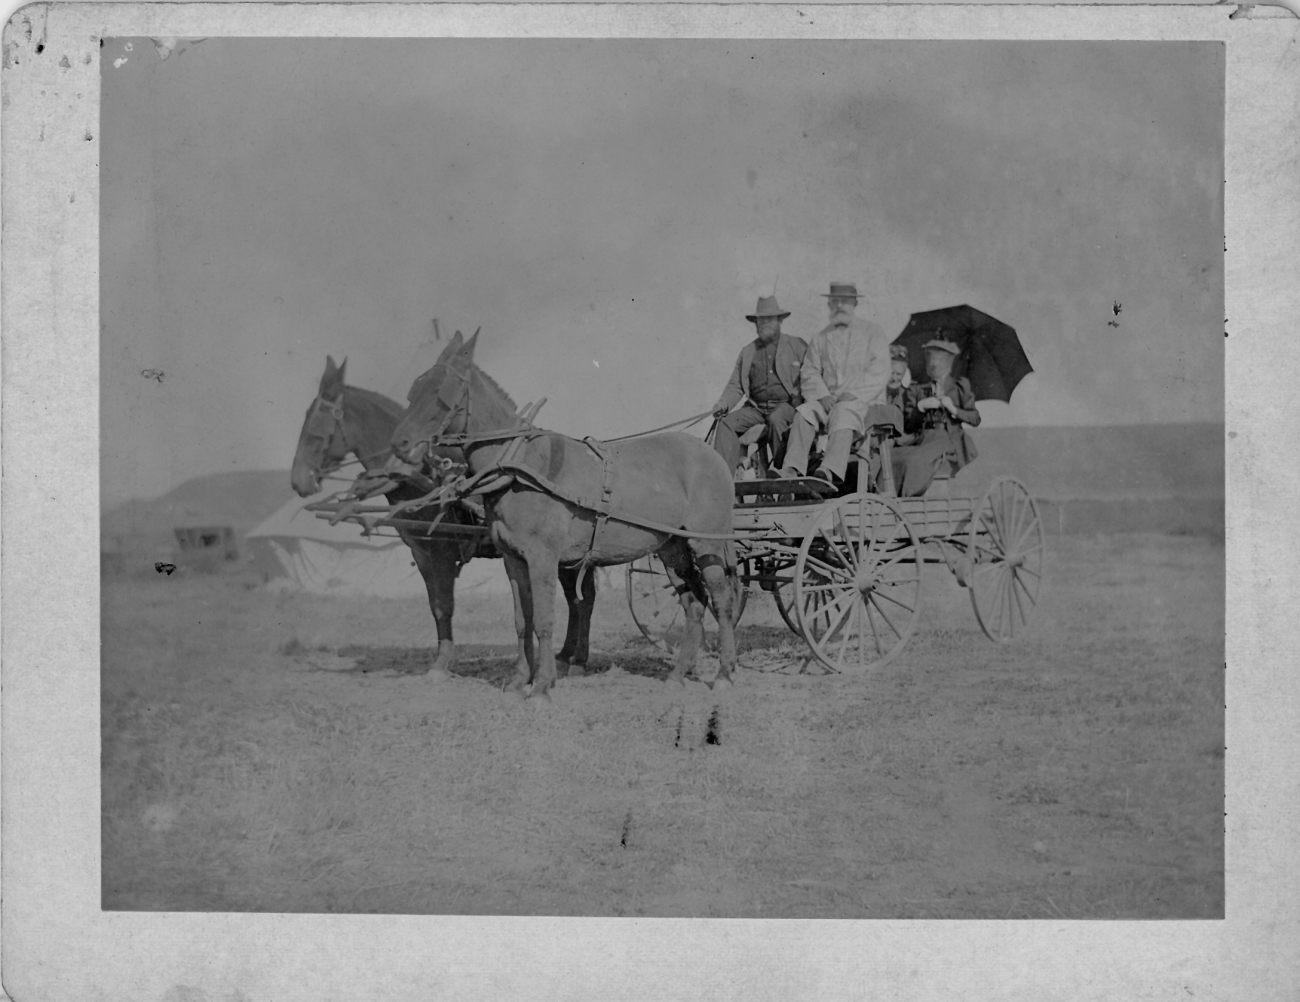 Alonzo Mosman, United States/Mexico Boundary Commissioner and AssistantUnited States Coast and Geodetic Survey, in front seat right; his wife is one of the two women on back seat